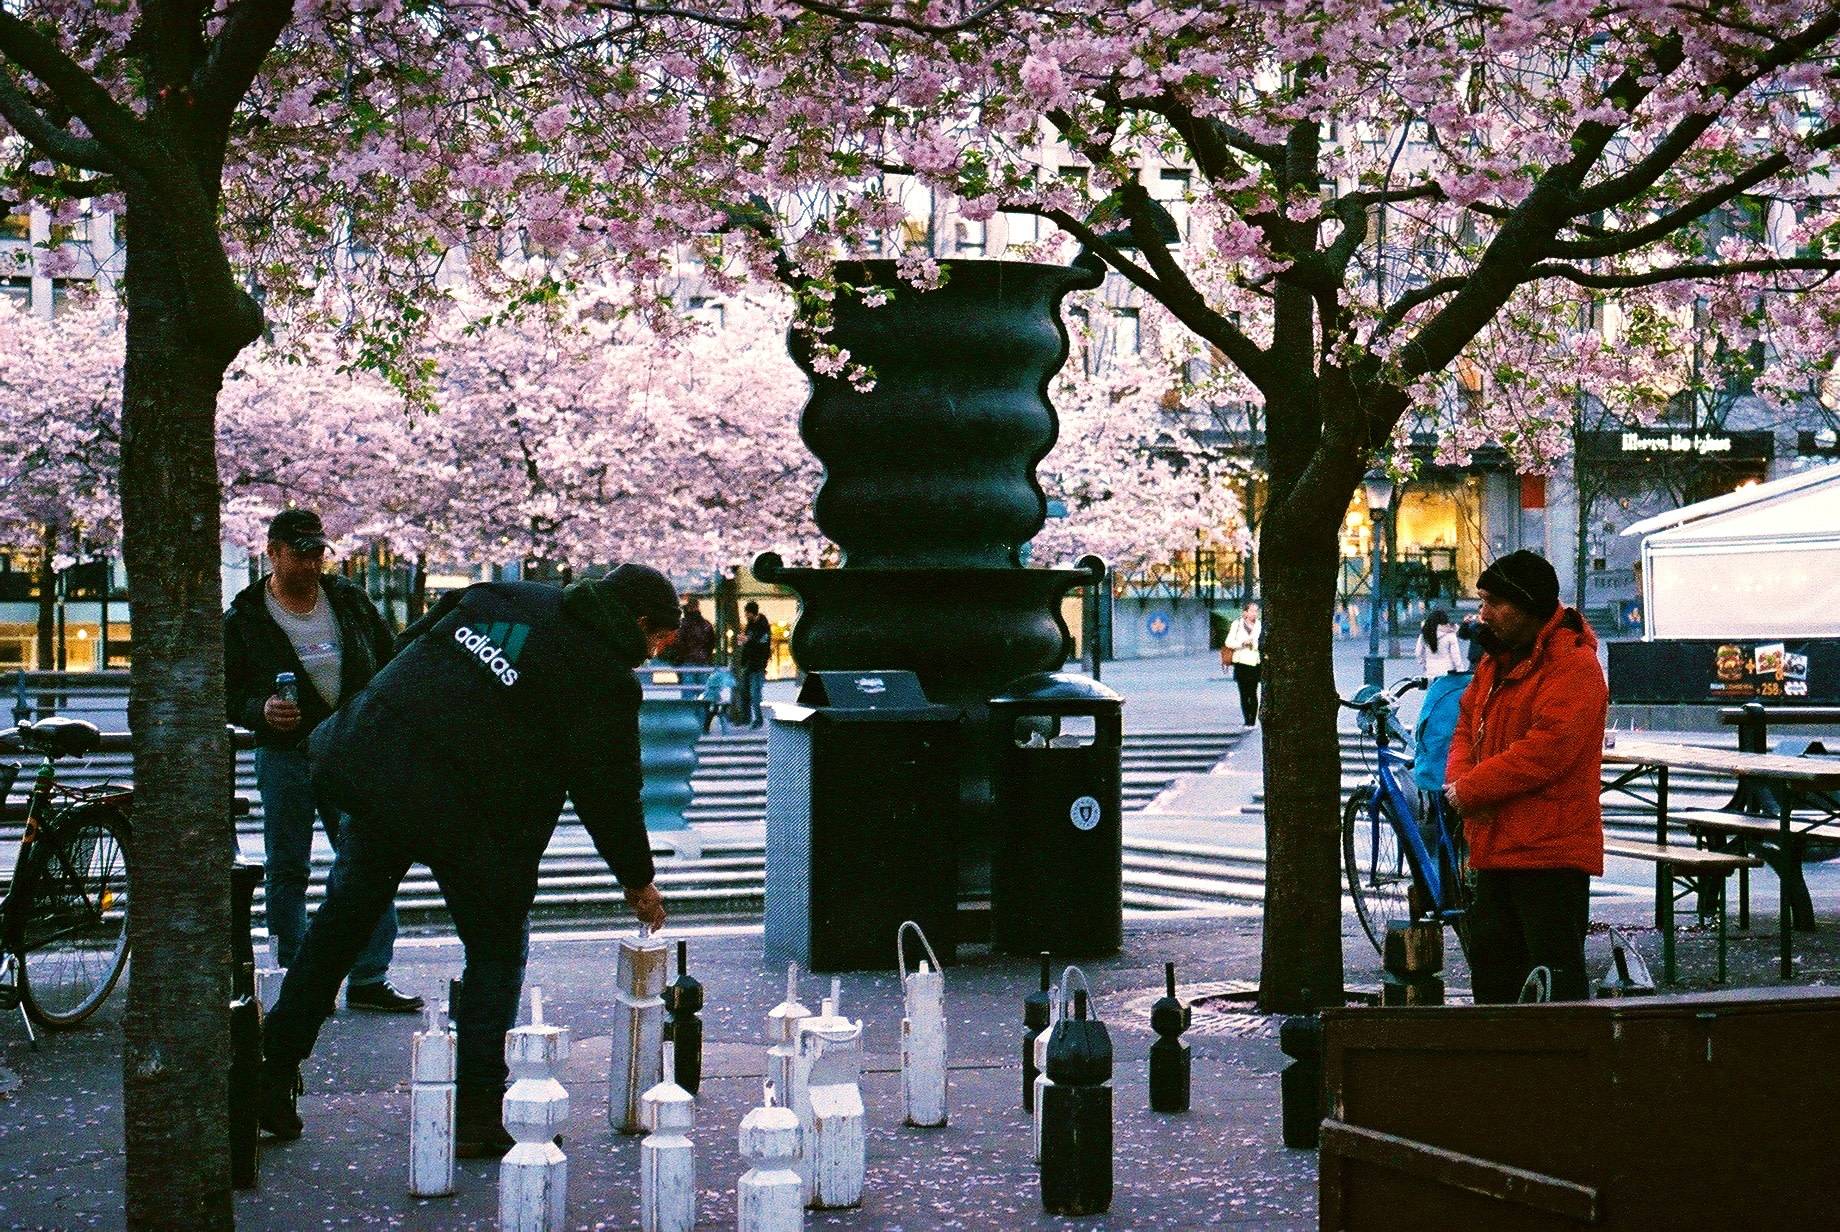 two men playing chess on the street under blooming cherry blossom trees while another one is watching the game